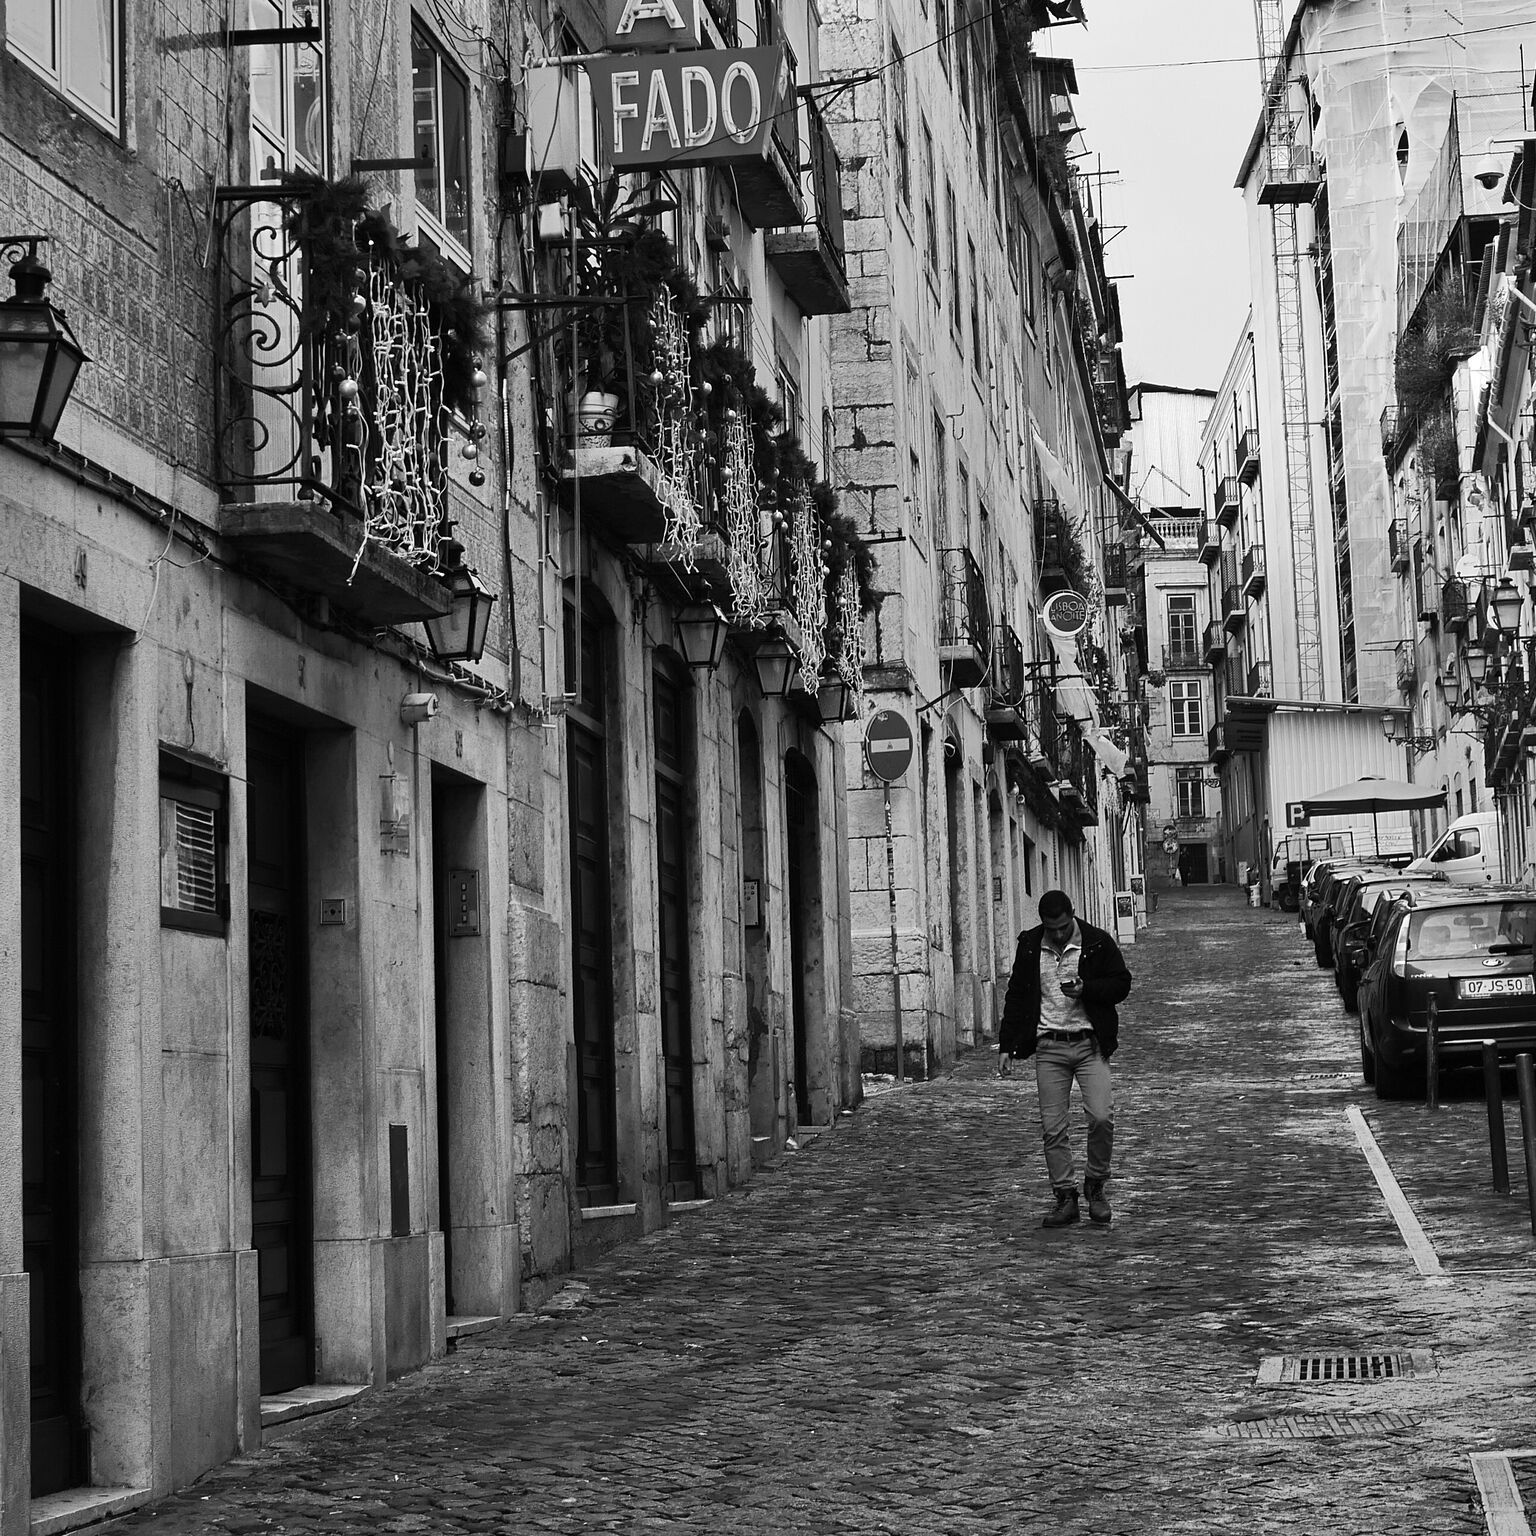 Man strolls in the Bairo Alto of Lisbon, the fado singing district packed with great restaurants featuring traditional dishes.